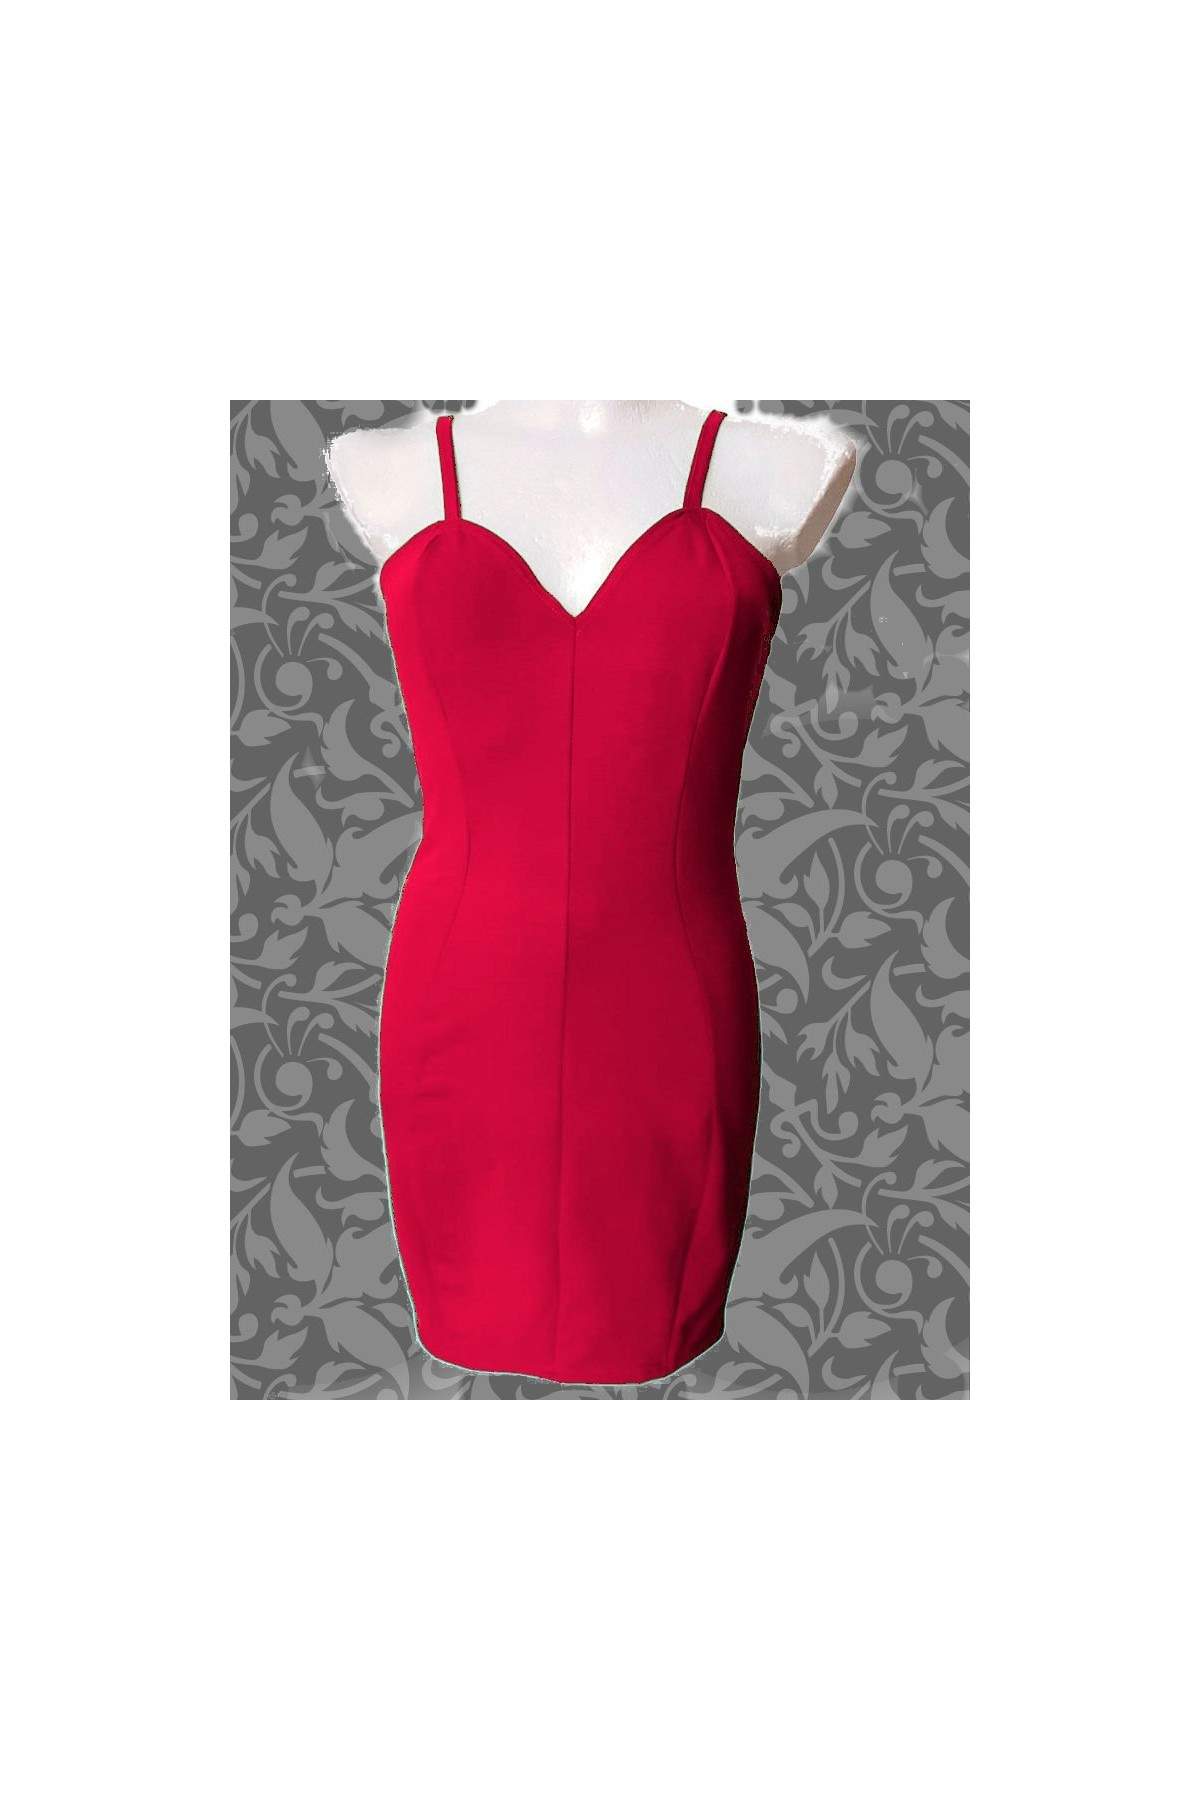 Red Stretch Cotton Strap Dress CockPart Dress Size 34 - 52 35,00 € - 